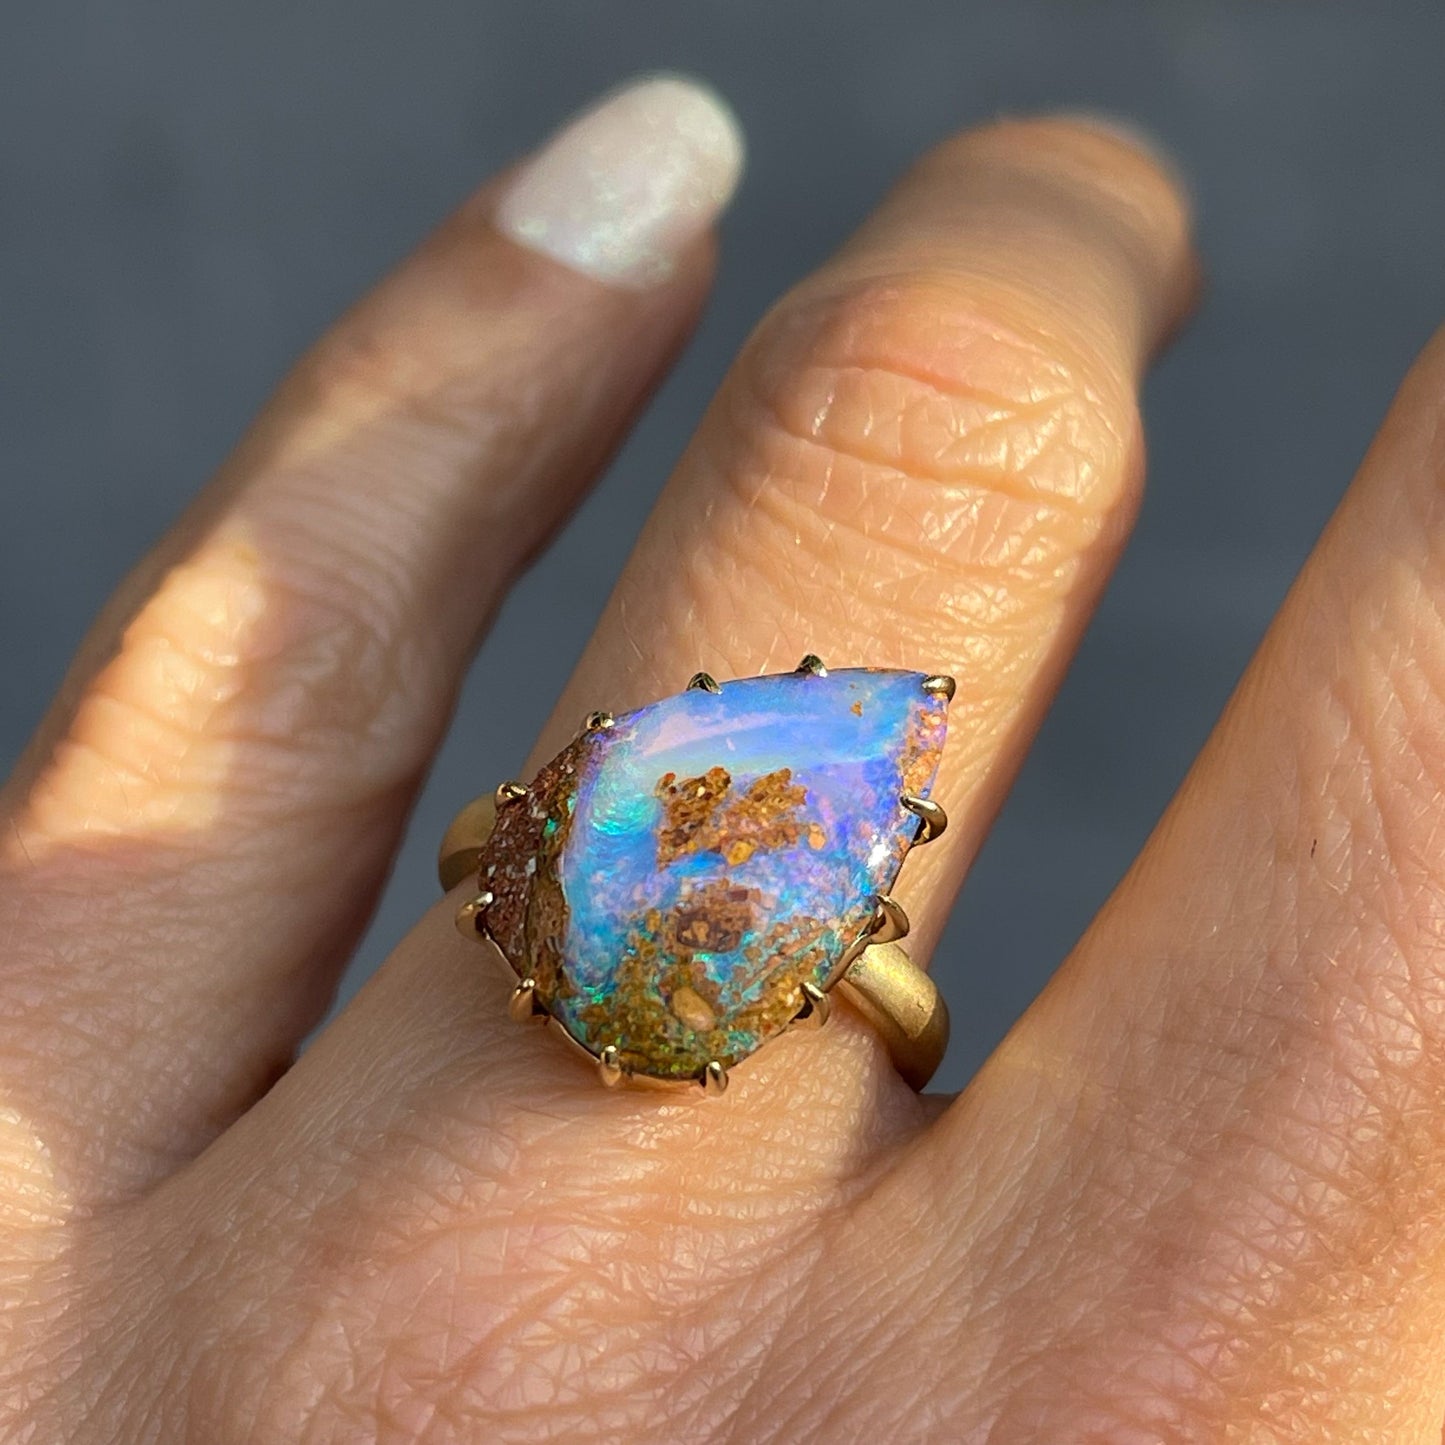 A NIXIN Jewelry Australian Opal Ring mounted in a 14k yellow gold prong setting. The natural opal ring is modeled on a hand.